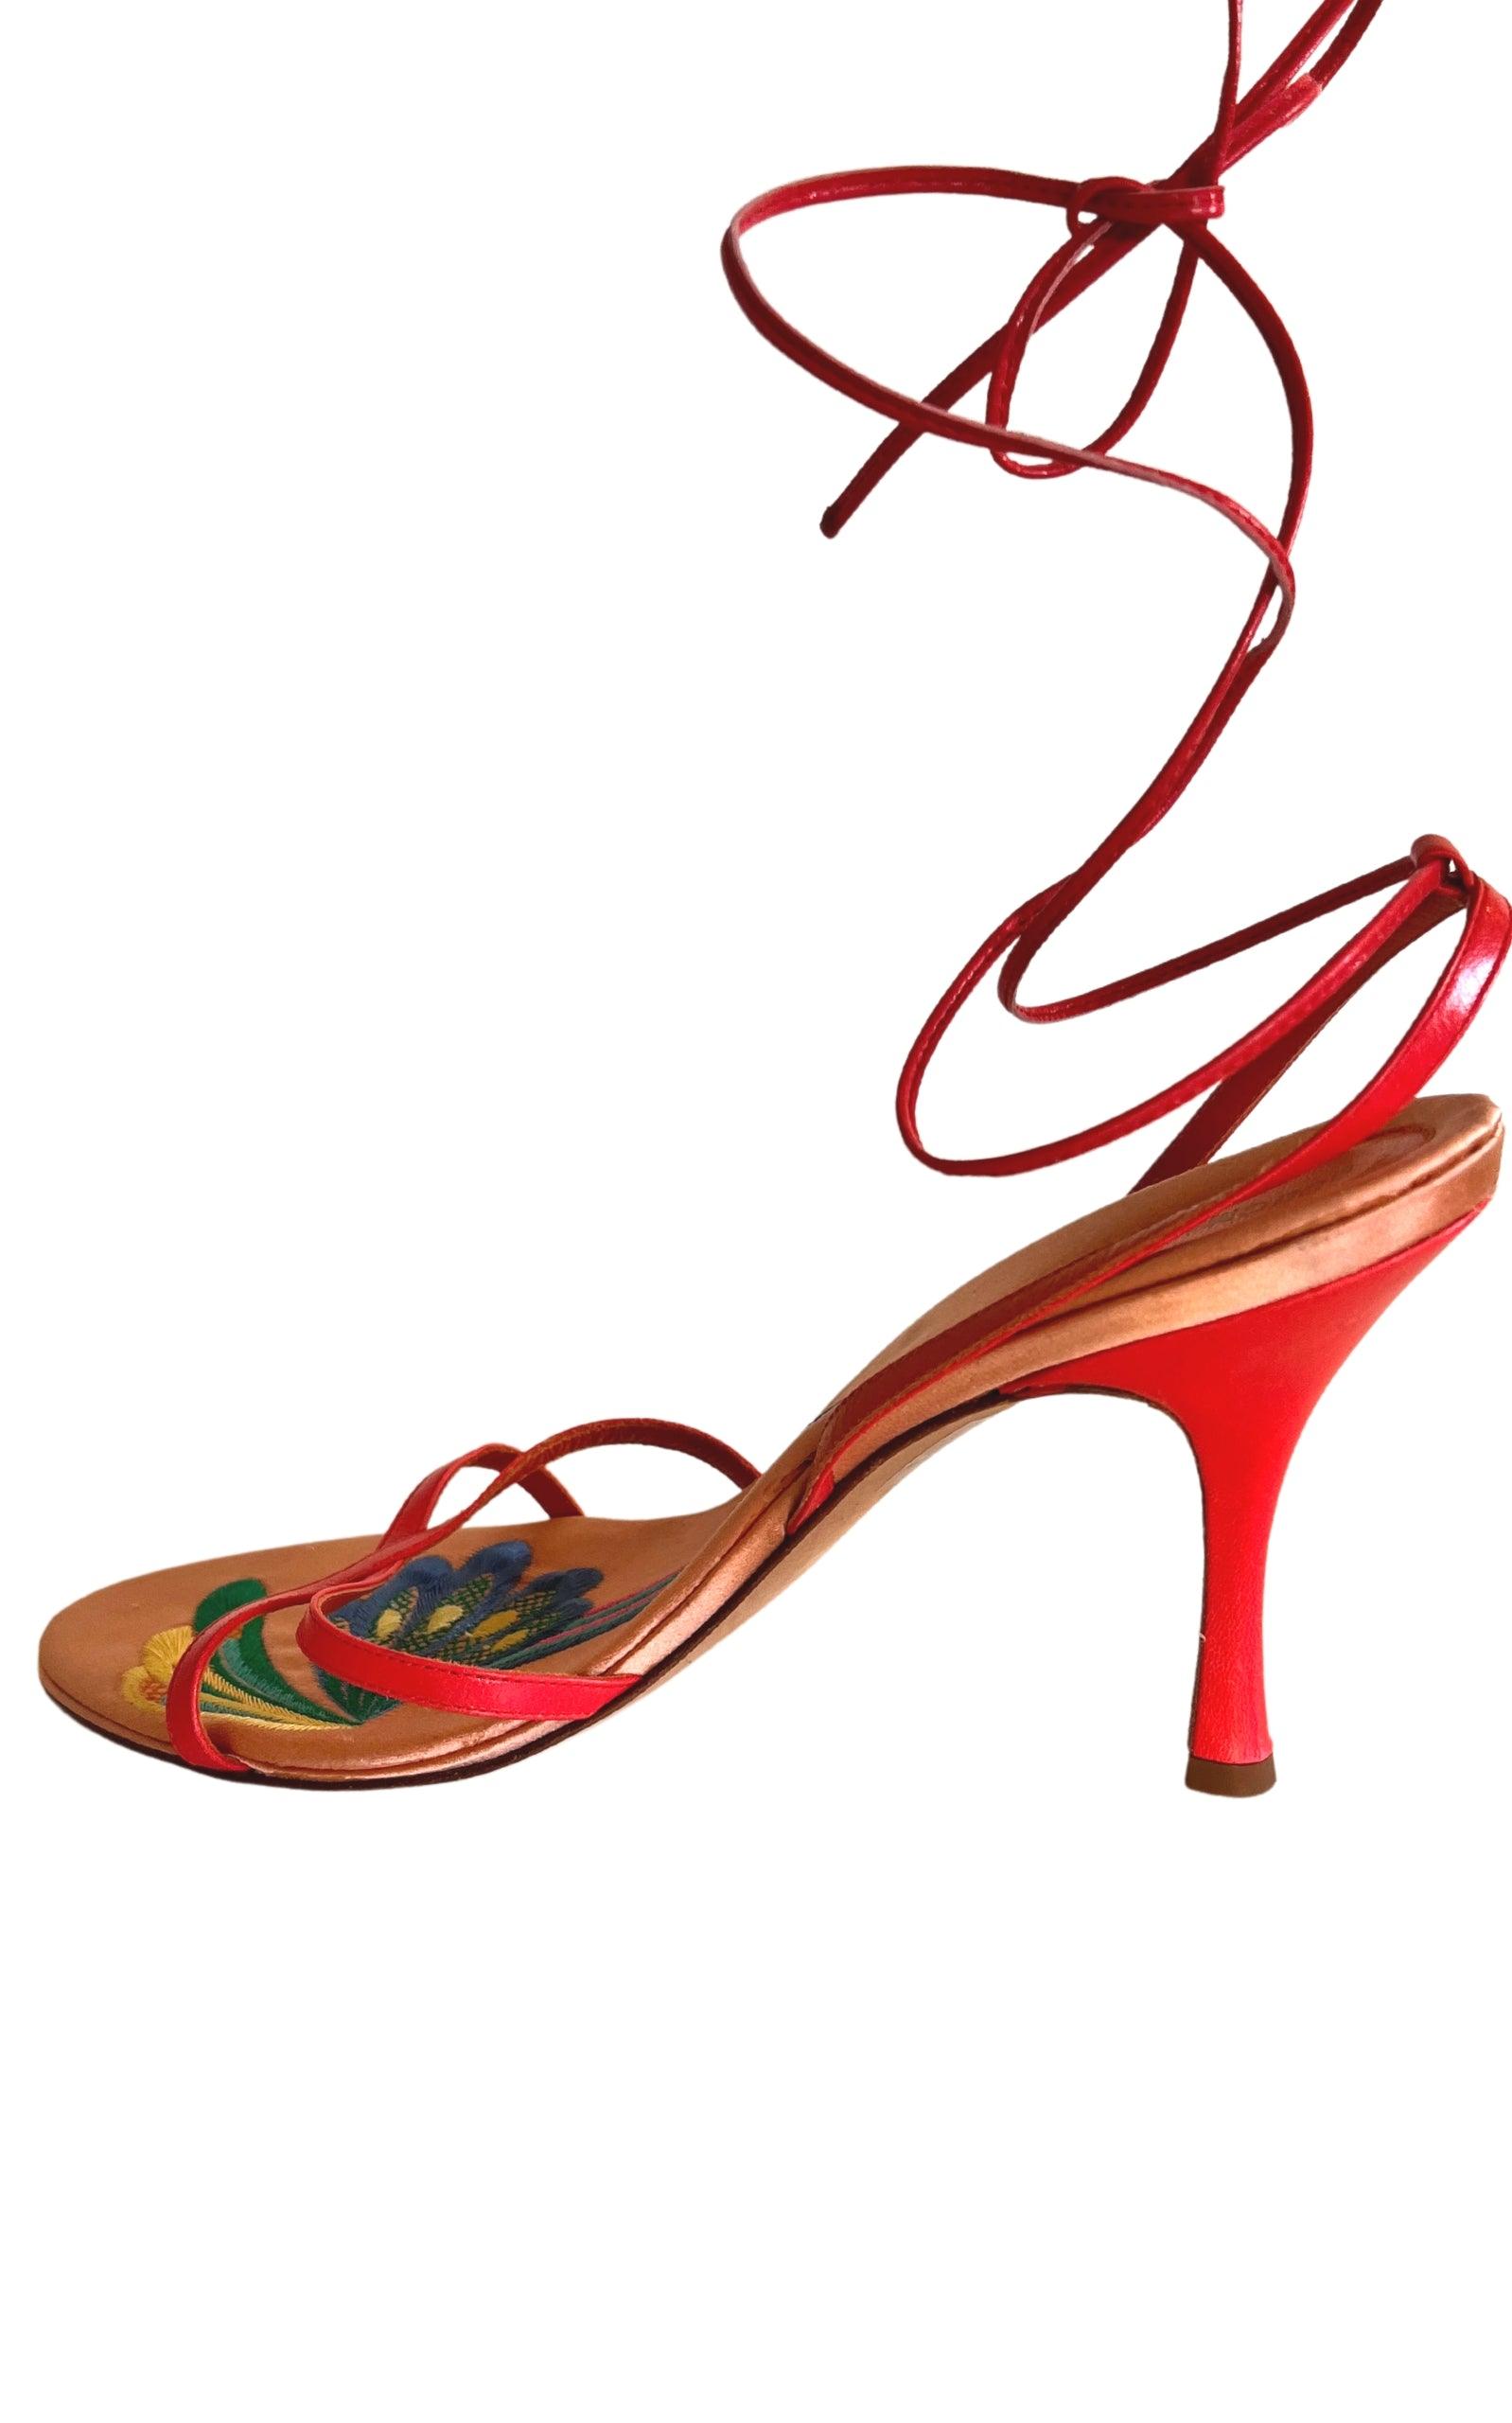  BCBGMAXAZRIALeather Sandals Insole Embroidery - Runway Catalog